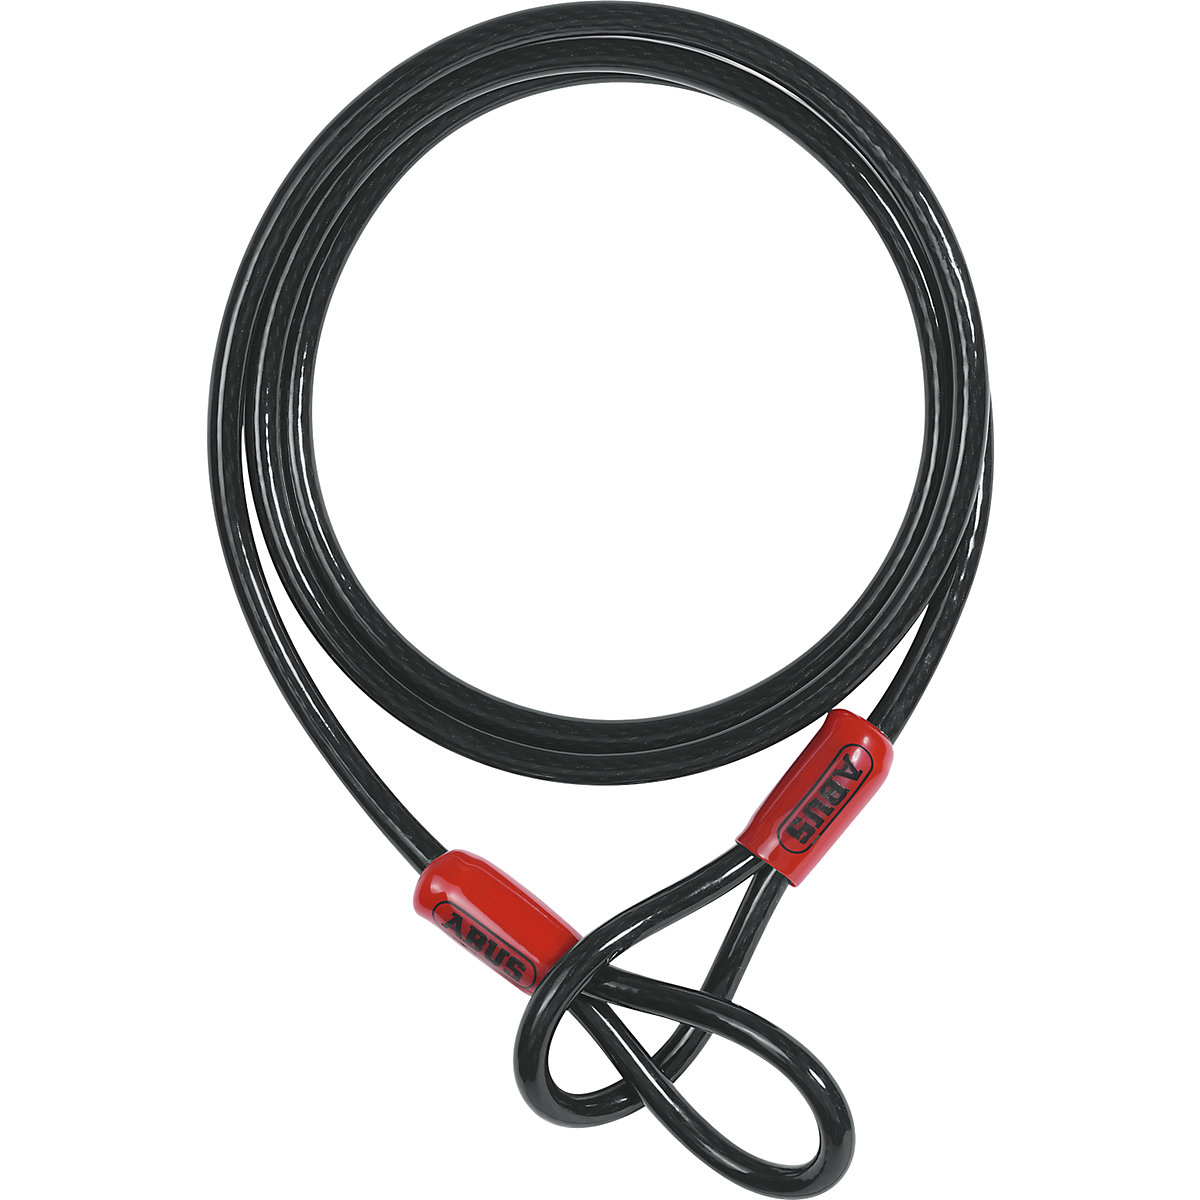 Additional lock cable with looped ends – ABUS, plastic sheathed, length 2000 mm-1